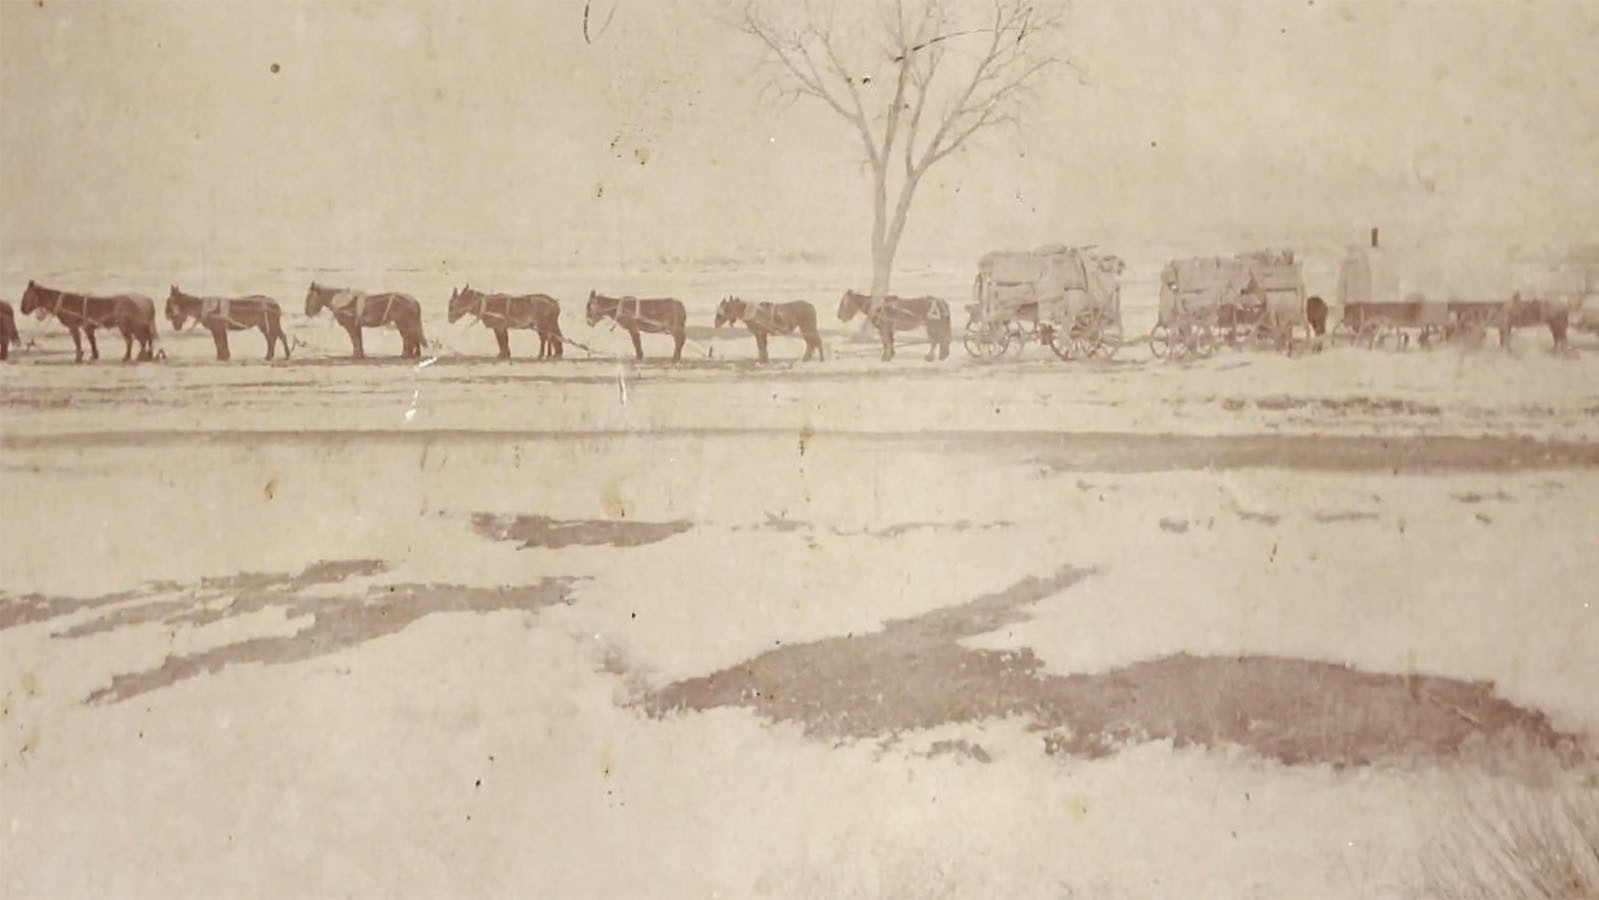 An early photo of Henry Johnson's famous 16-mule team, which would pull multiple wagons at a time.